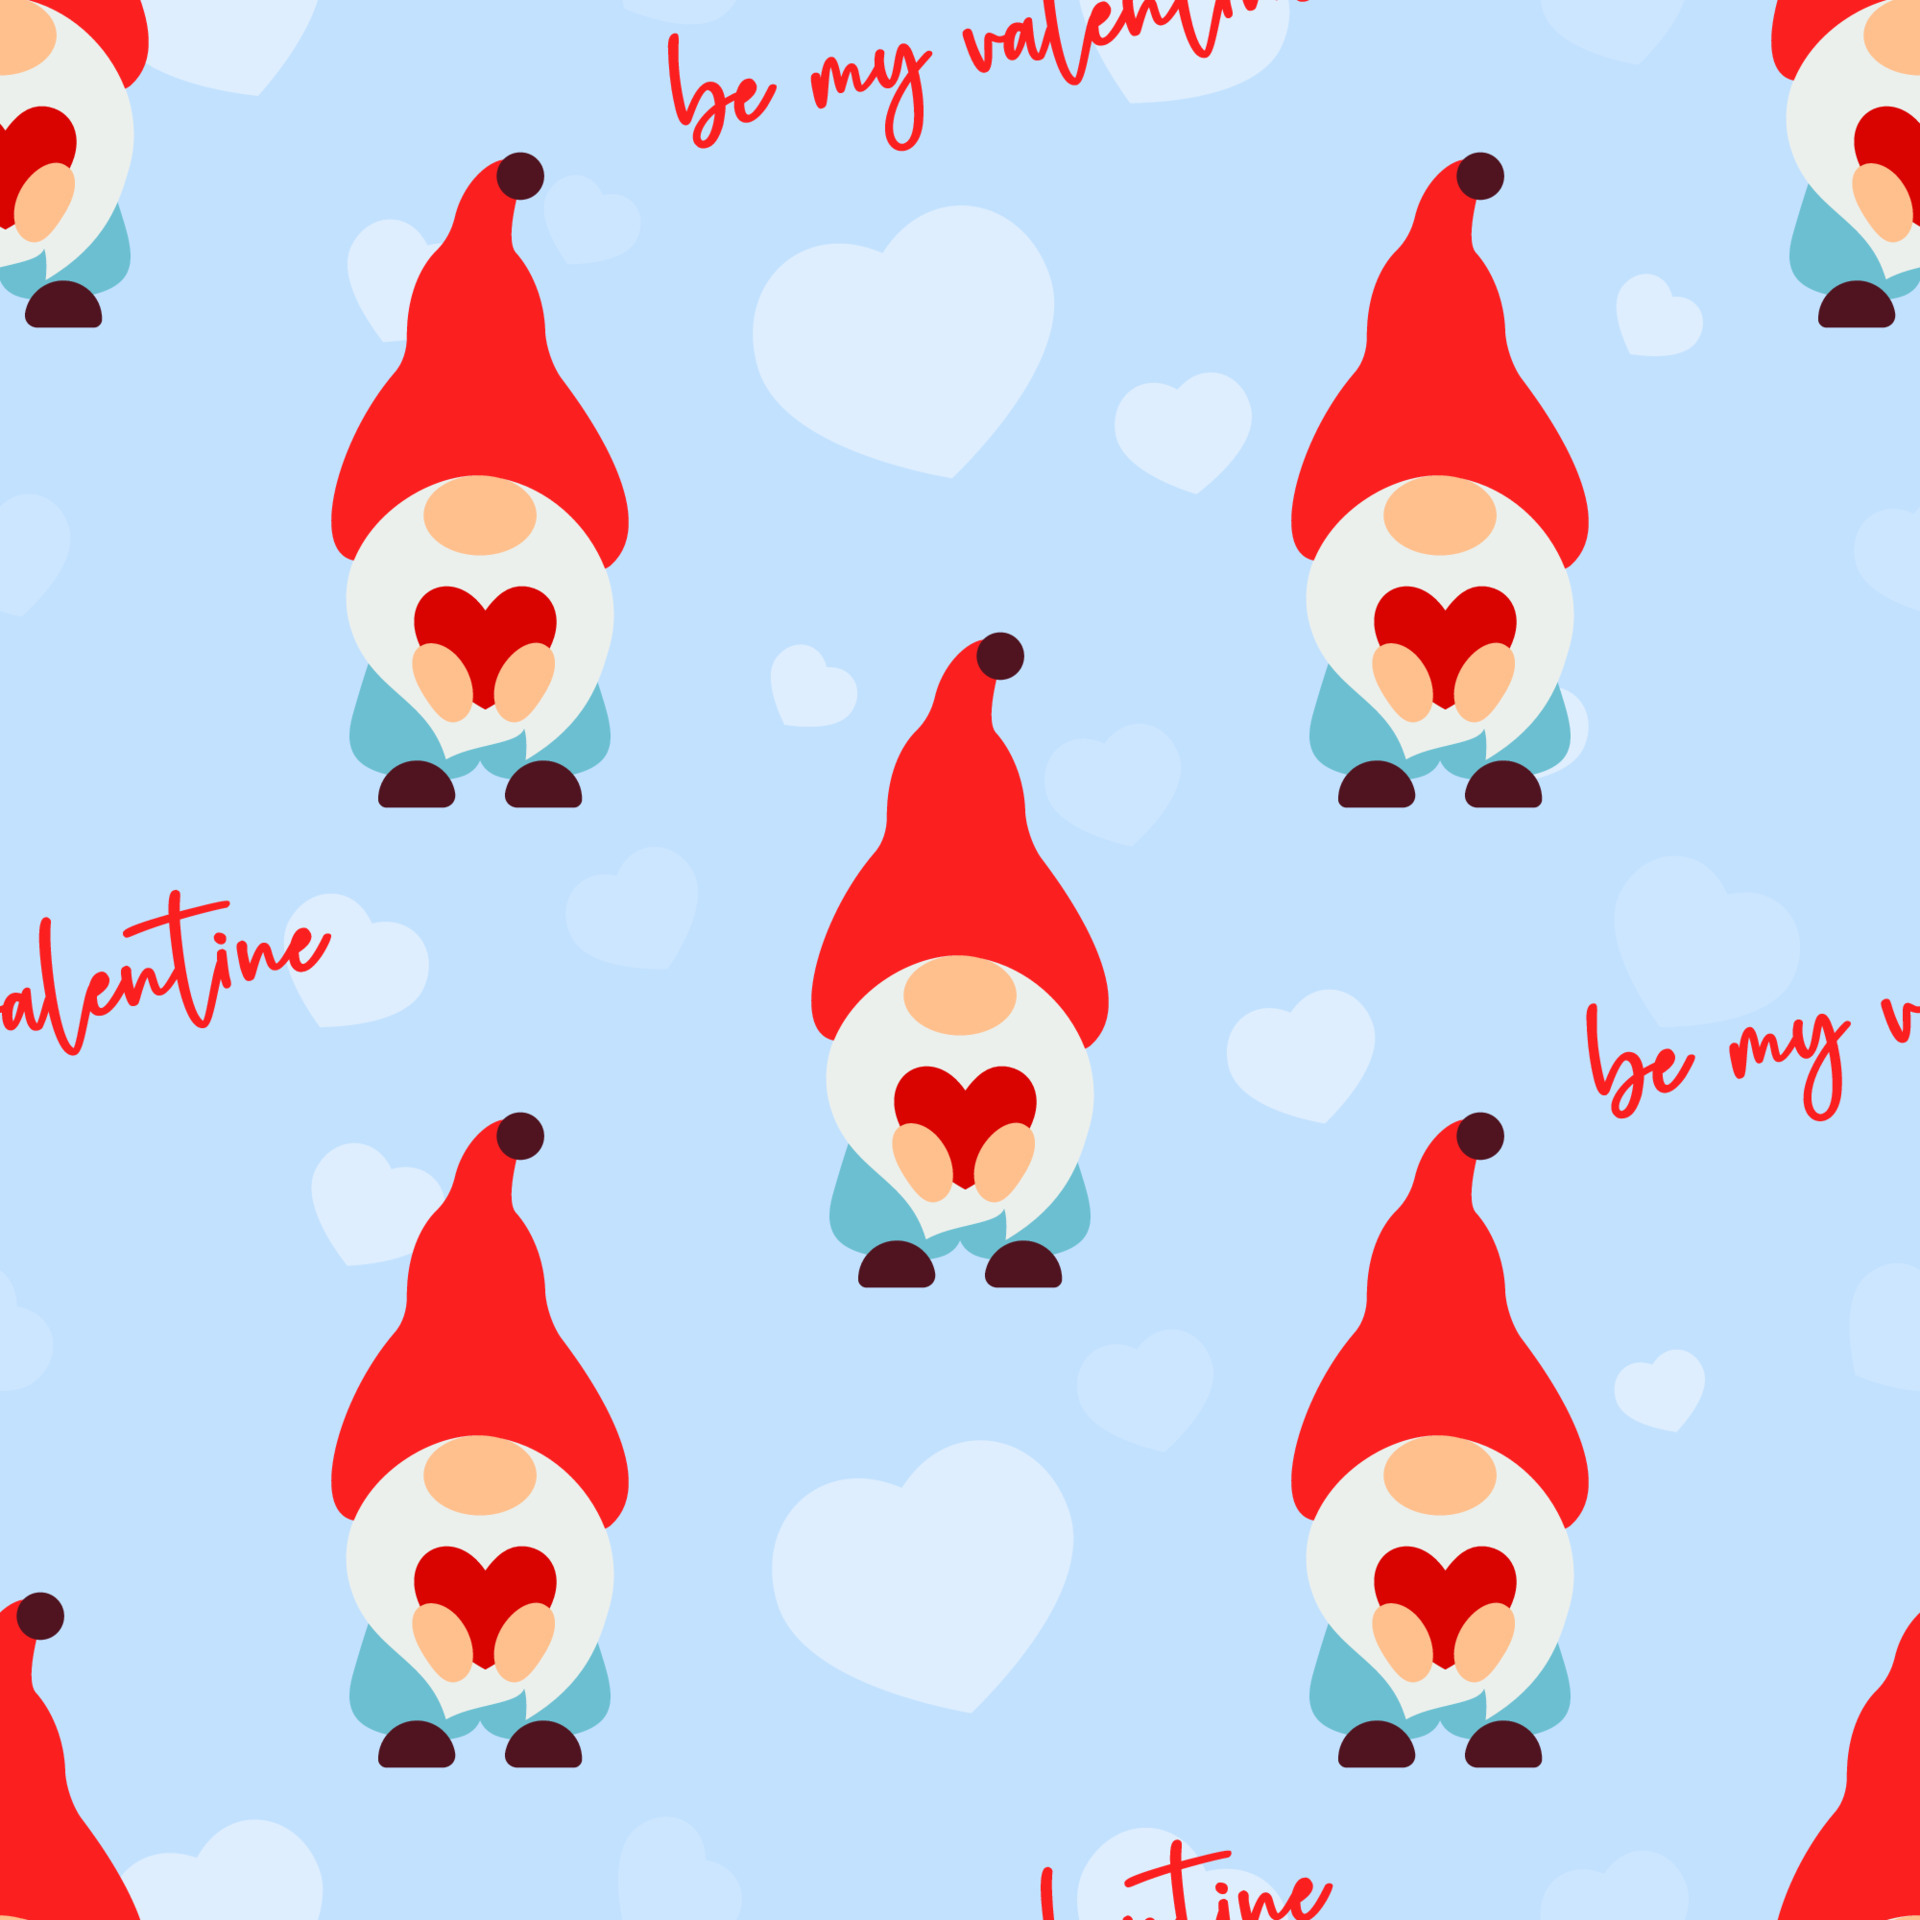 1300 Valentine Gnome Stock Photos Pictures  RoyaltyFree Images  iStock